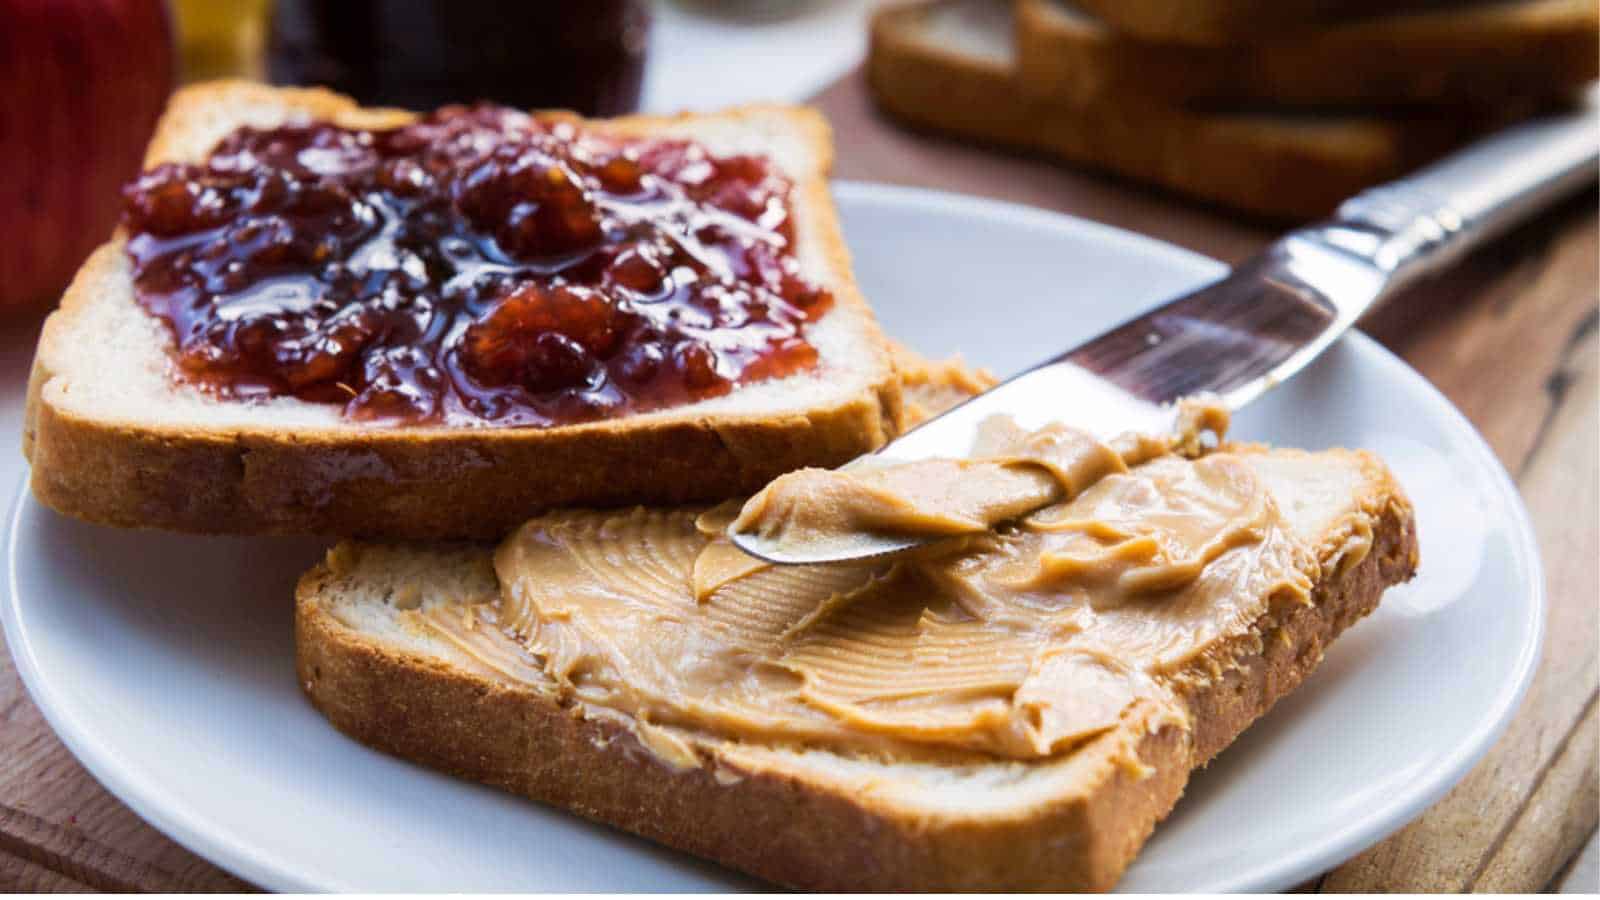 Peanut Butter and Jelly Sandwiches